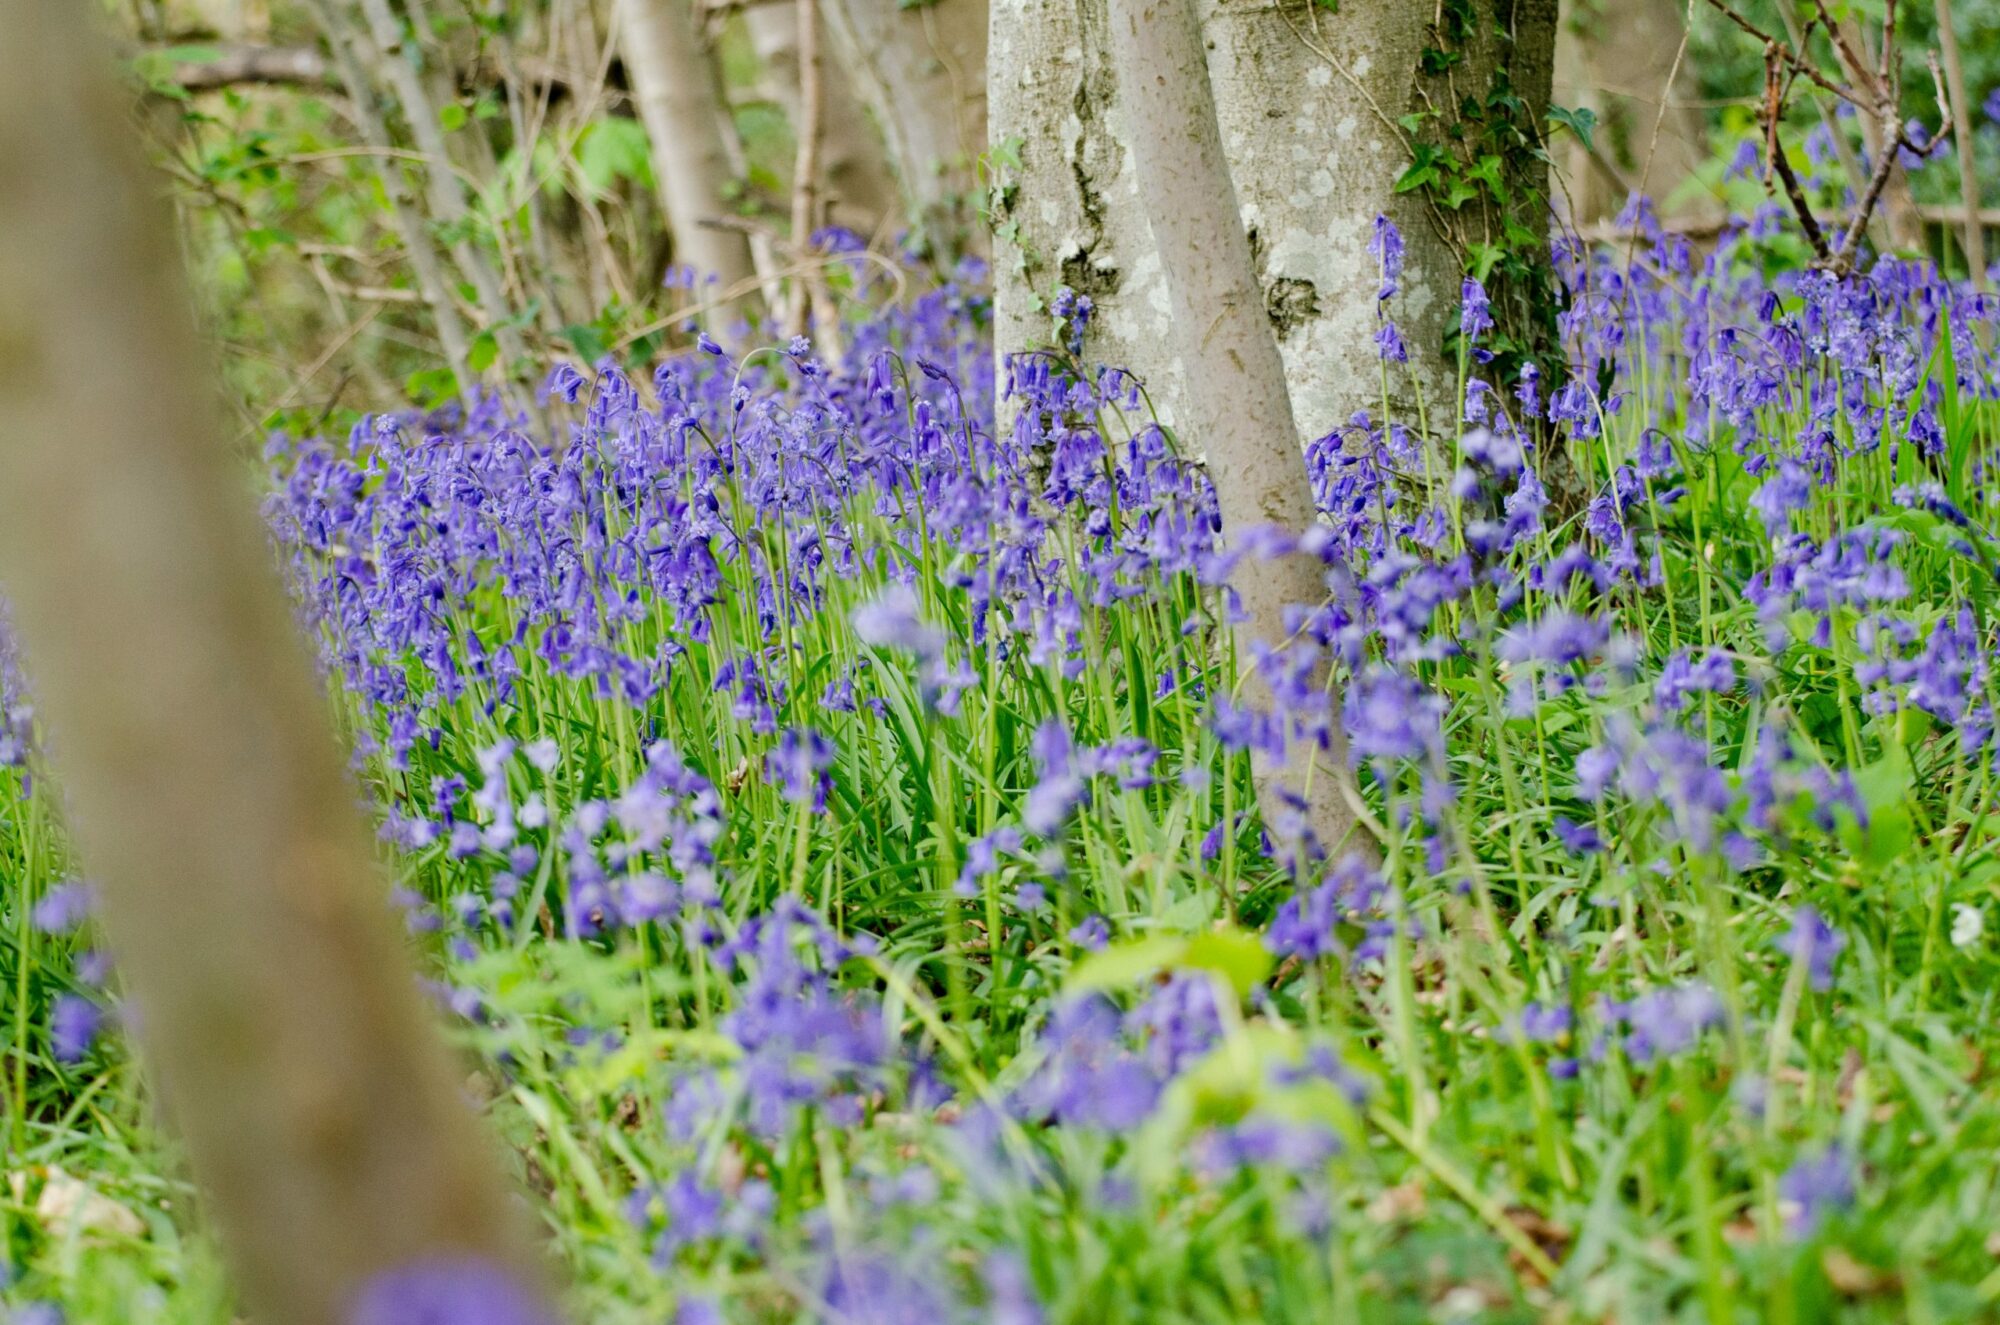 Image name Bluebells Josh Raper Conservation Media 5 scaled 1 the 7 image from the post Walking, Wellbeing and Wildlife in Yorkshire.com.